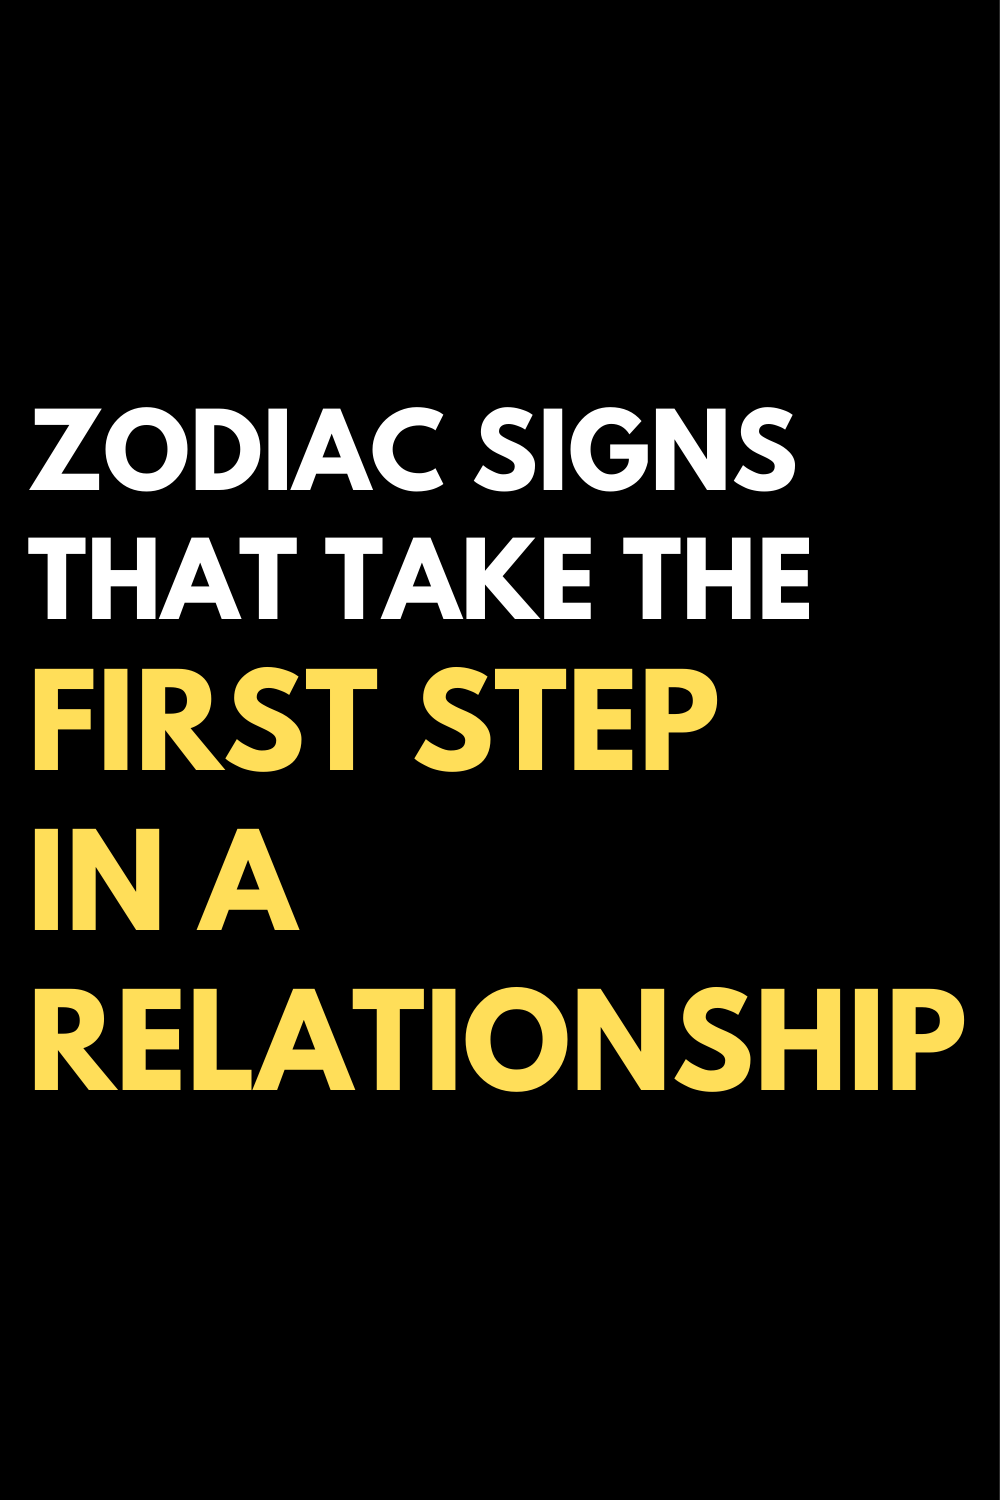 Zodiac signs that take the first step in a relationship